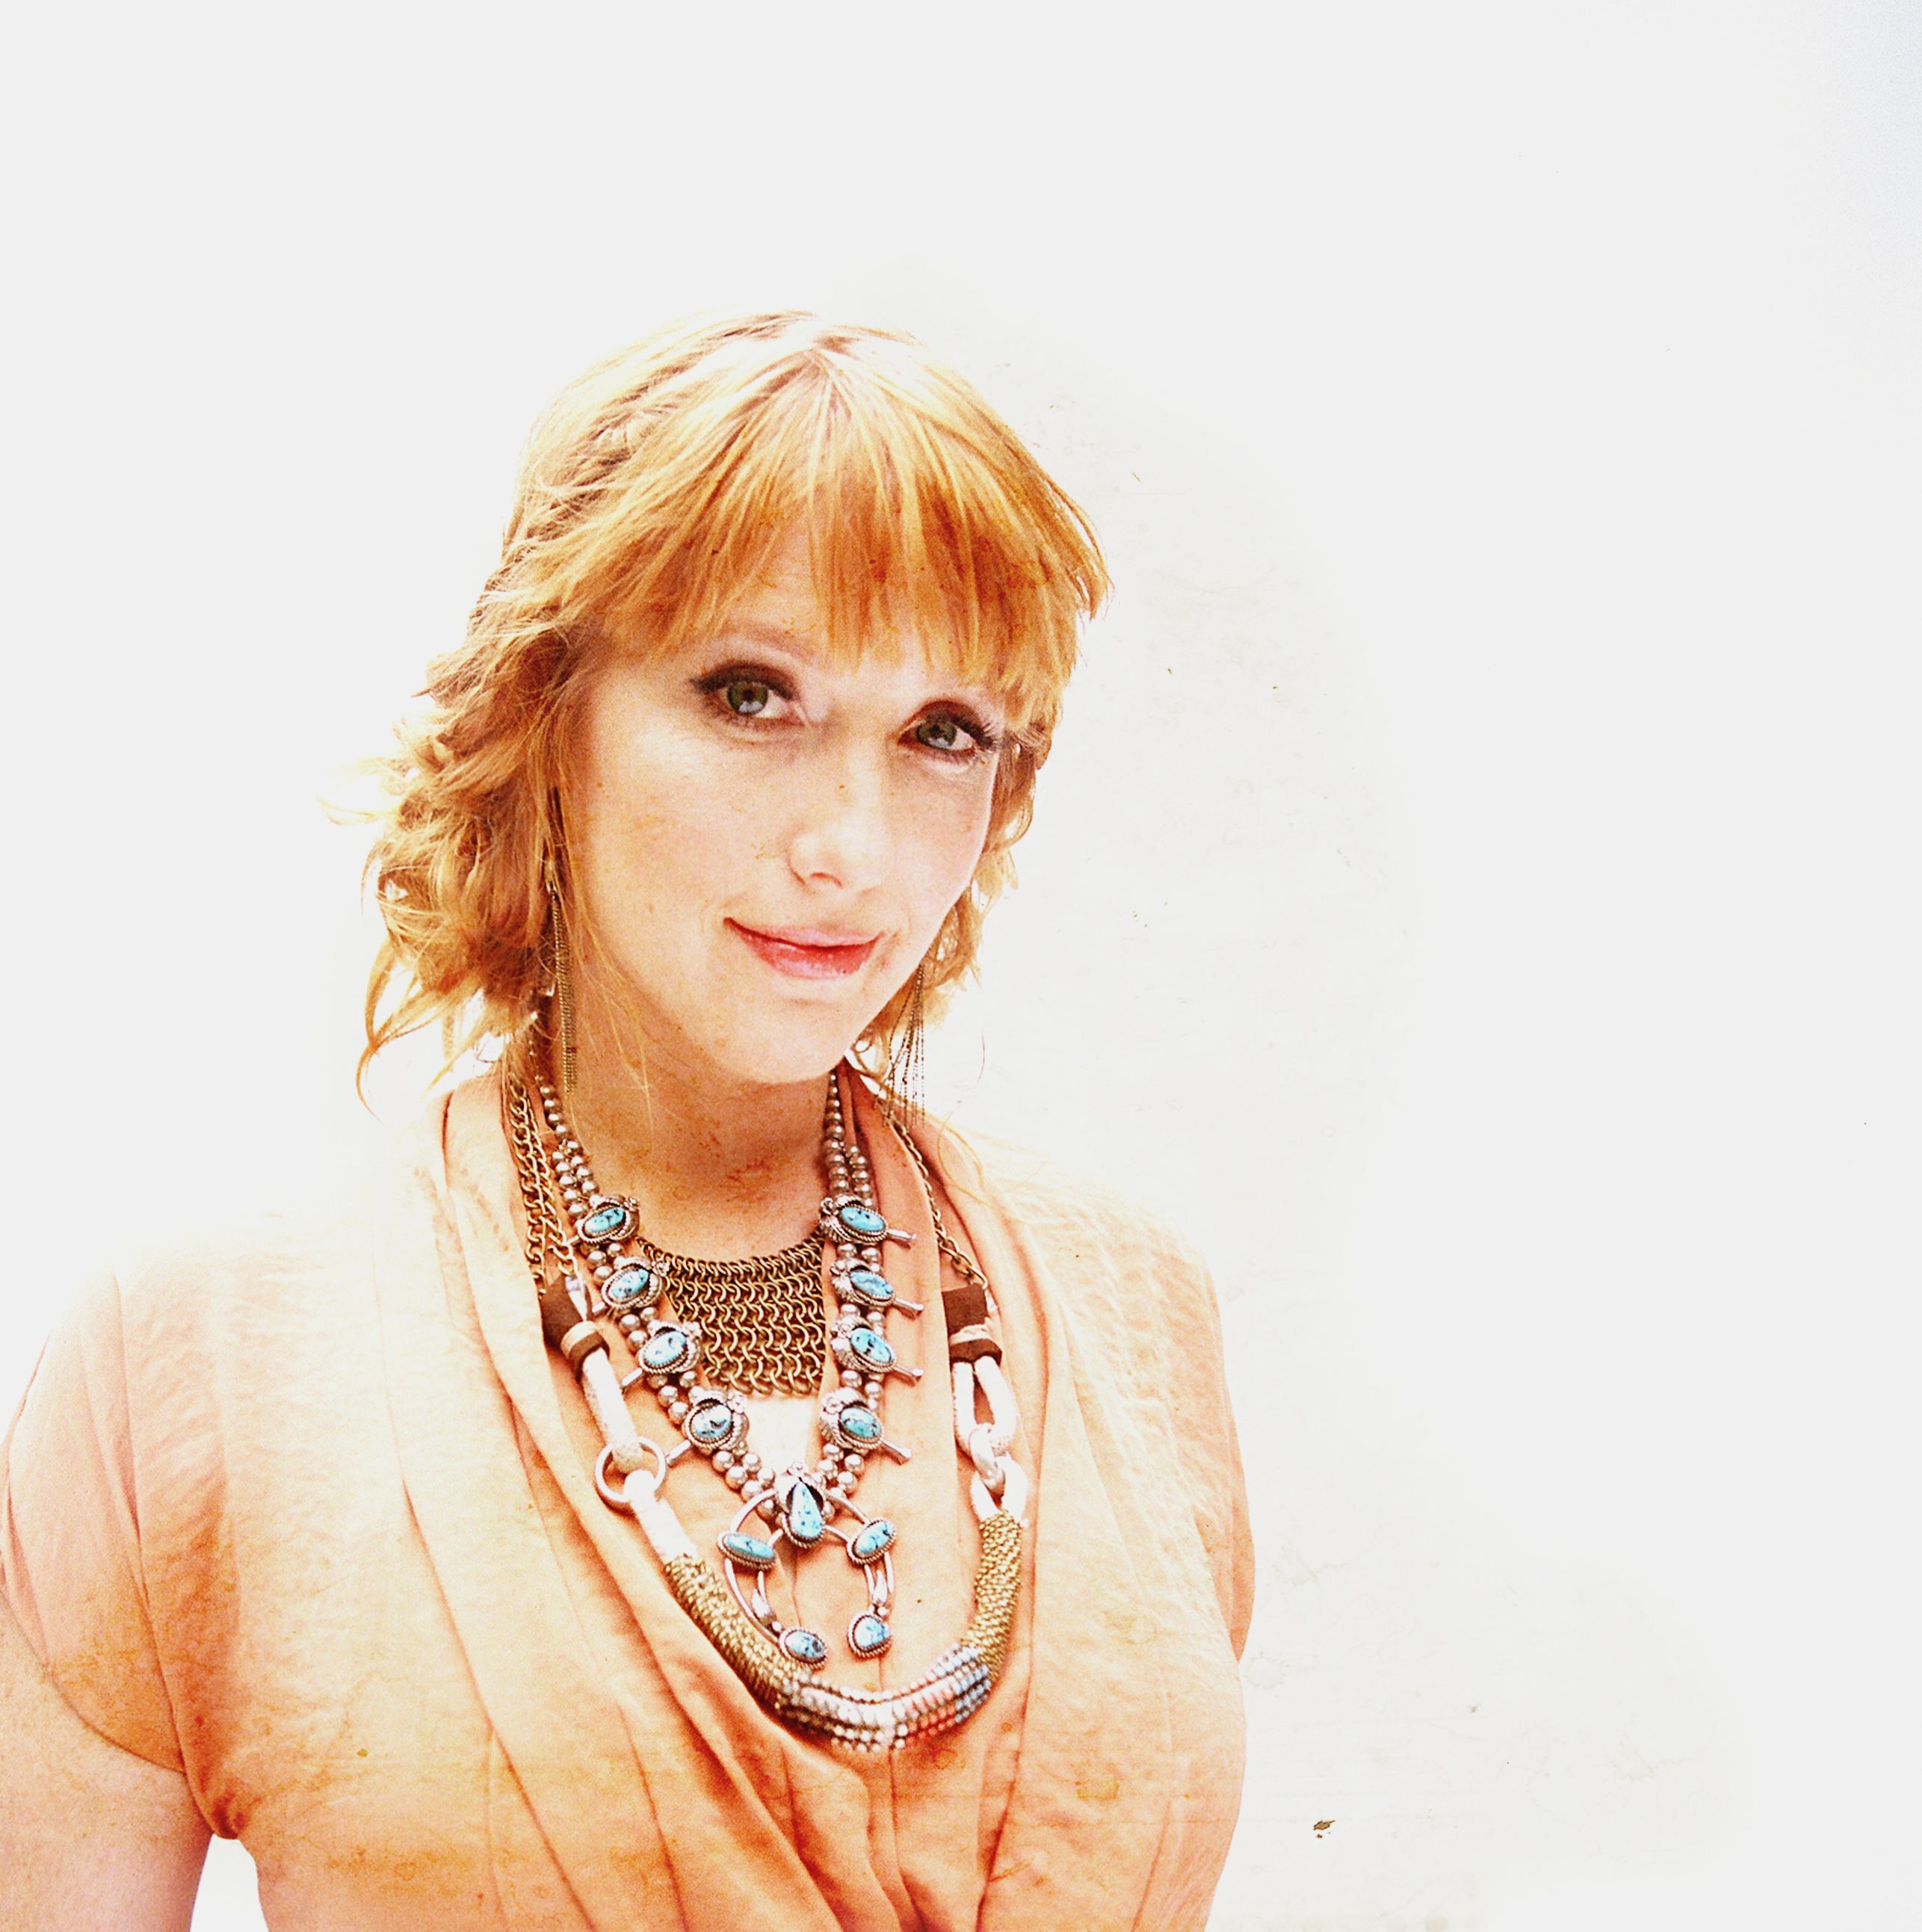 A Conversation With Sixpence None The Richer Lead Singer And Solo